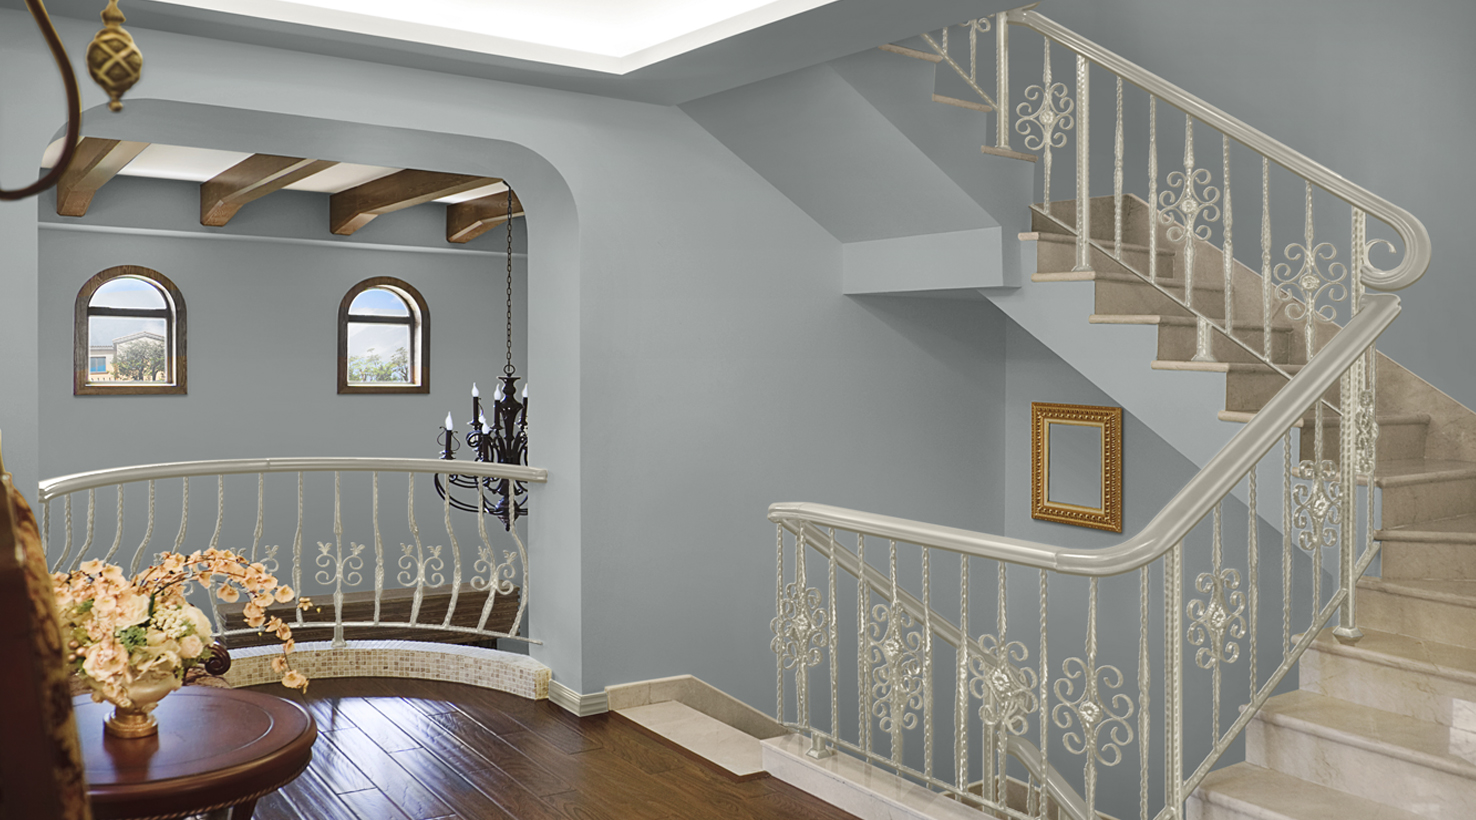 Brighten Up Dark Areas Of Your Home With The Right Paint